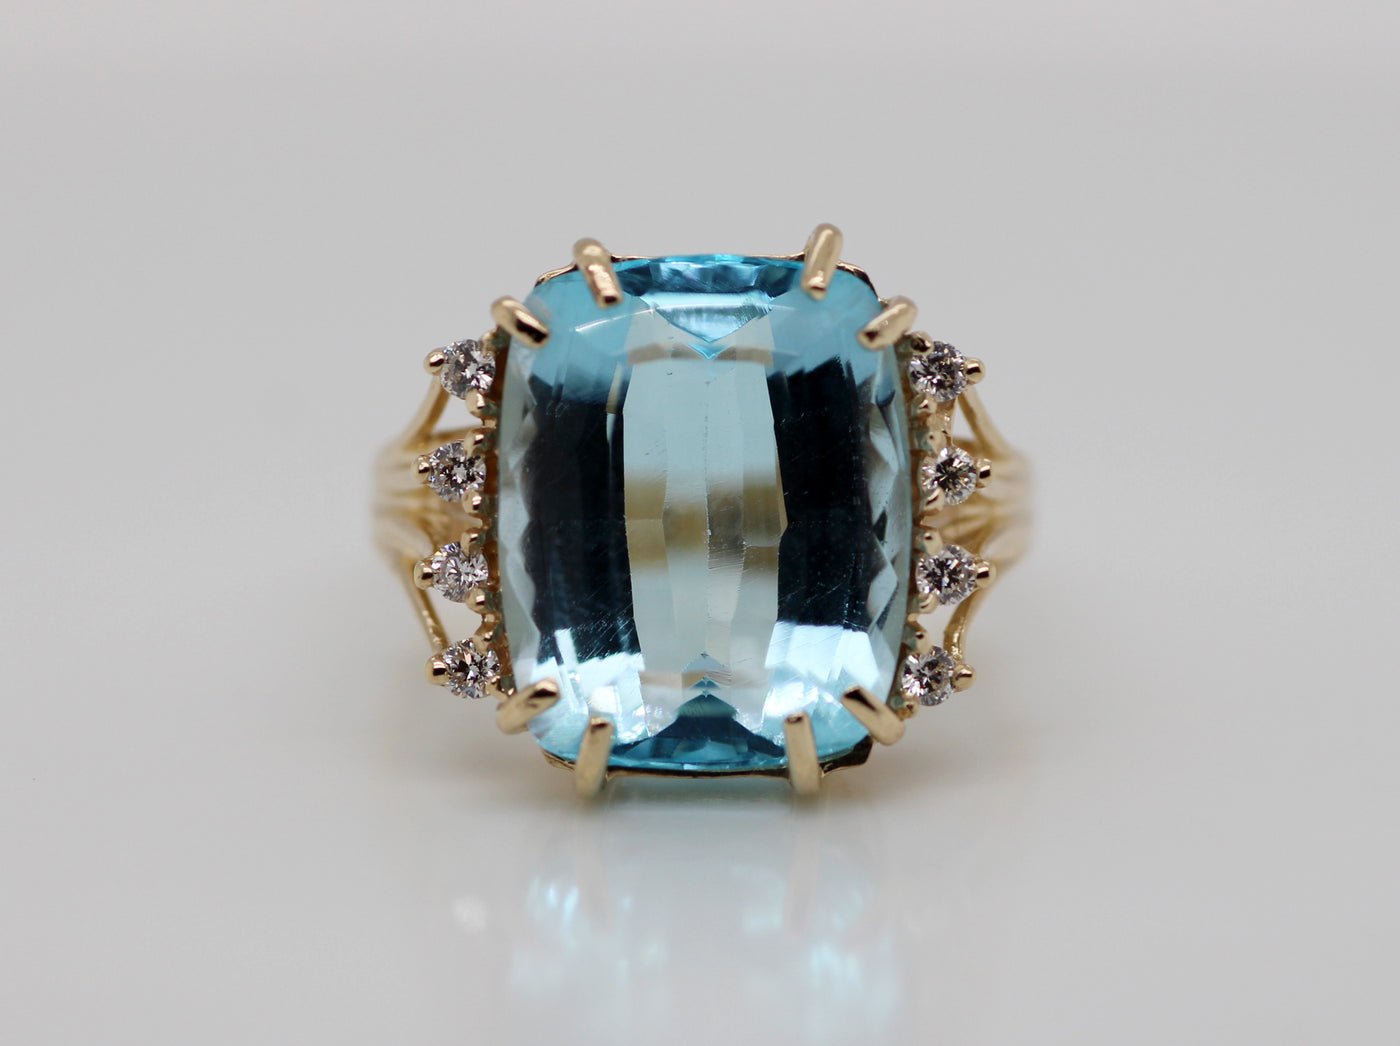 ESTATE 14KY 12.15 CT BLUE TOPAZ AND DIAMOND RING .12 CTTW H-SI1